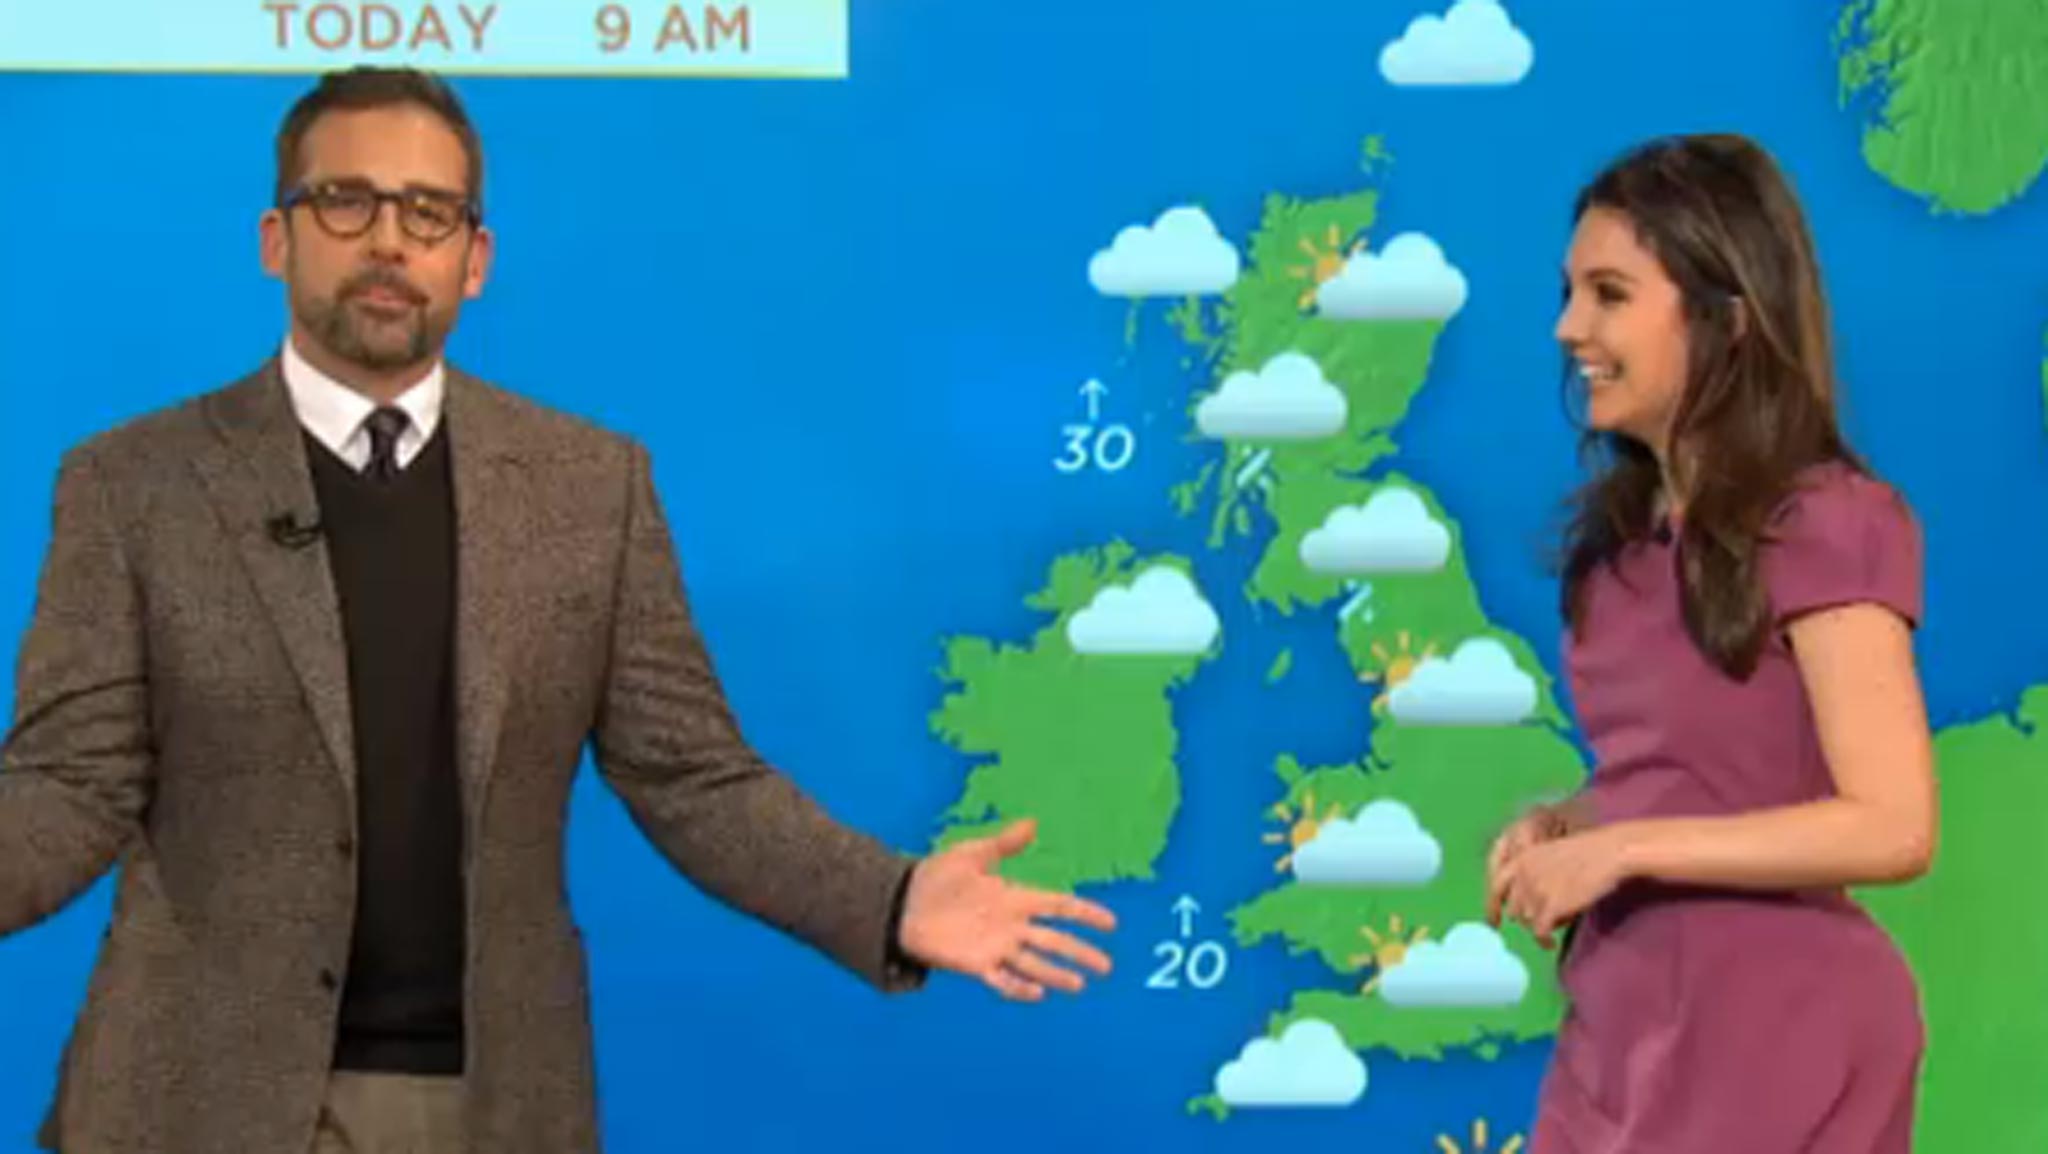 Steve Carell and Laura Tobin present the weather on this morning's Daybreak